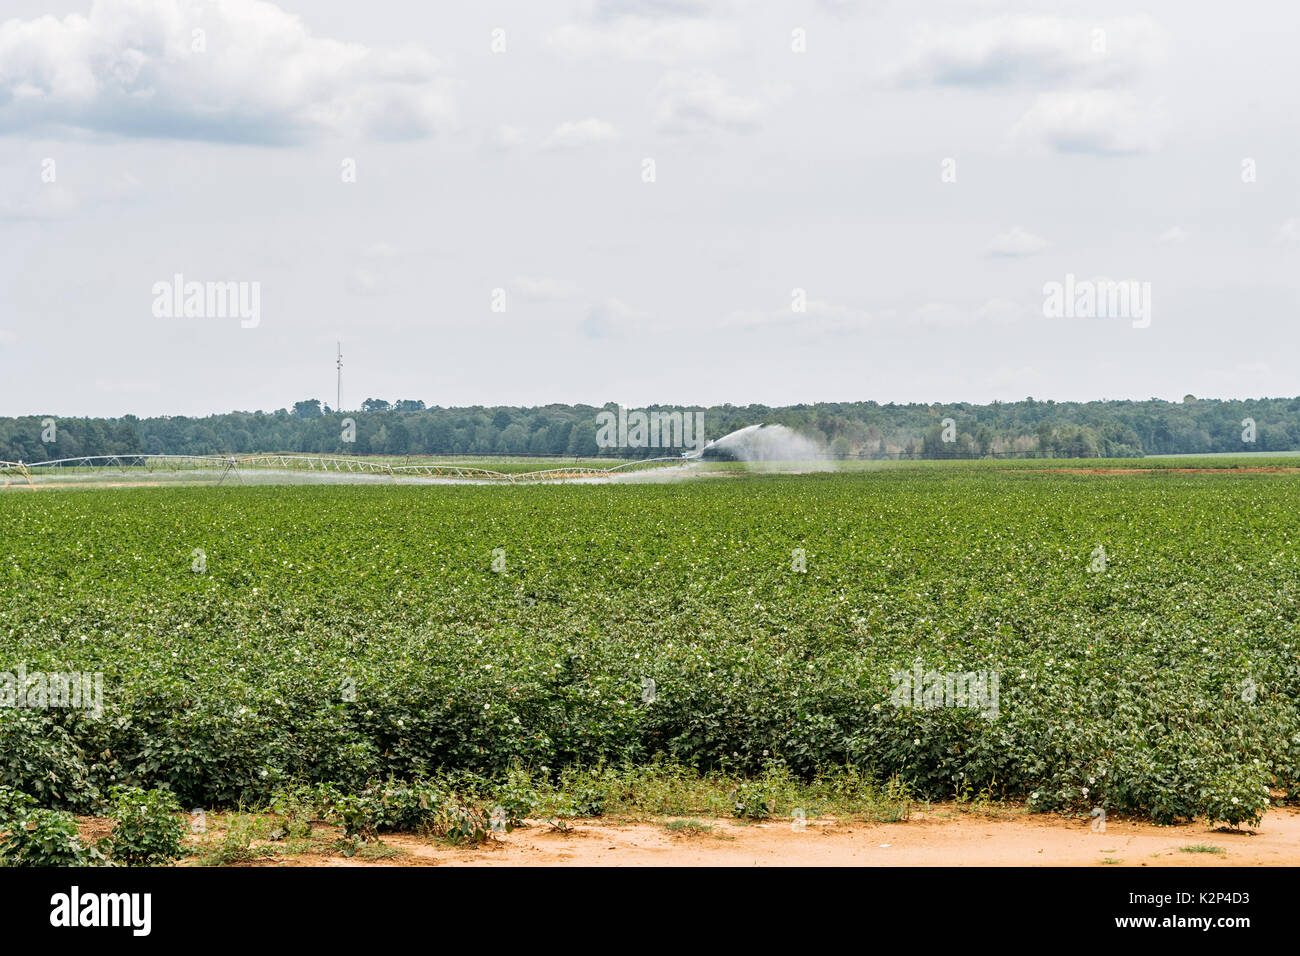 Center pivot irrigation system in operation irrigating cotton fields in central Alabama, USA. Stock Photo